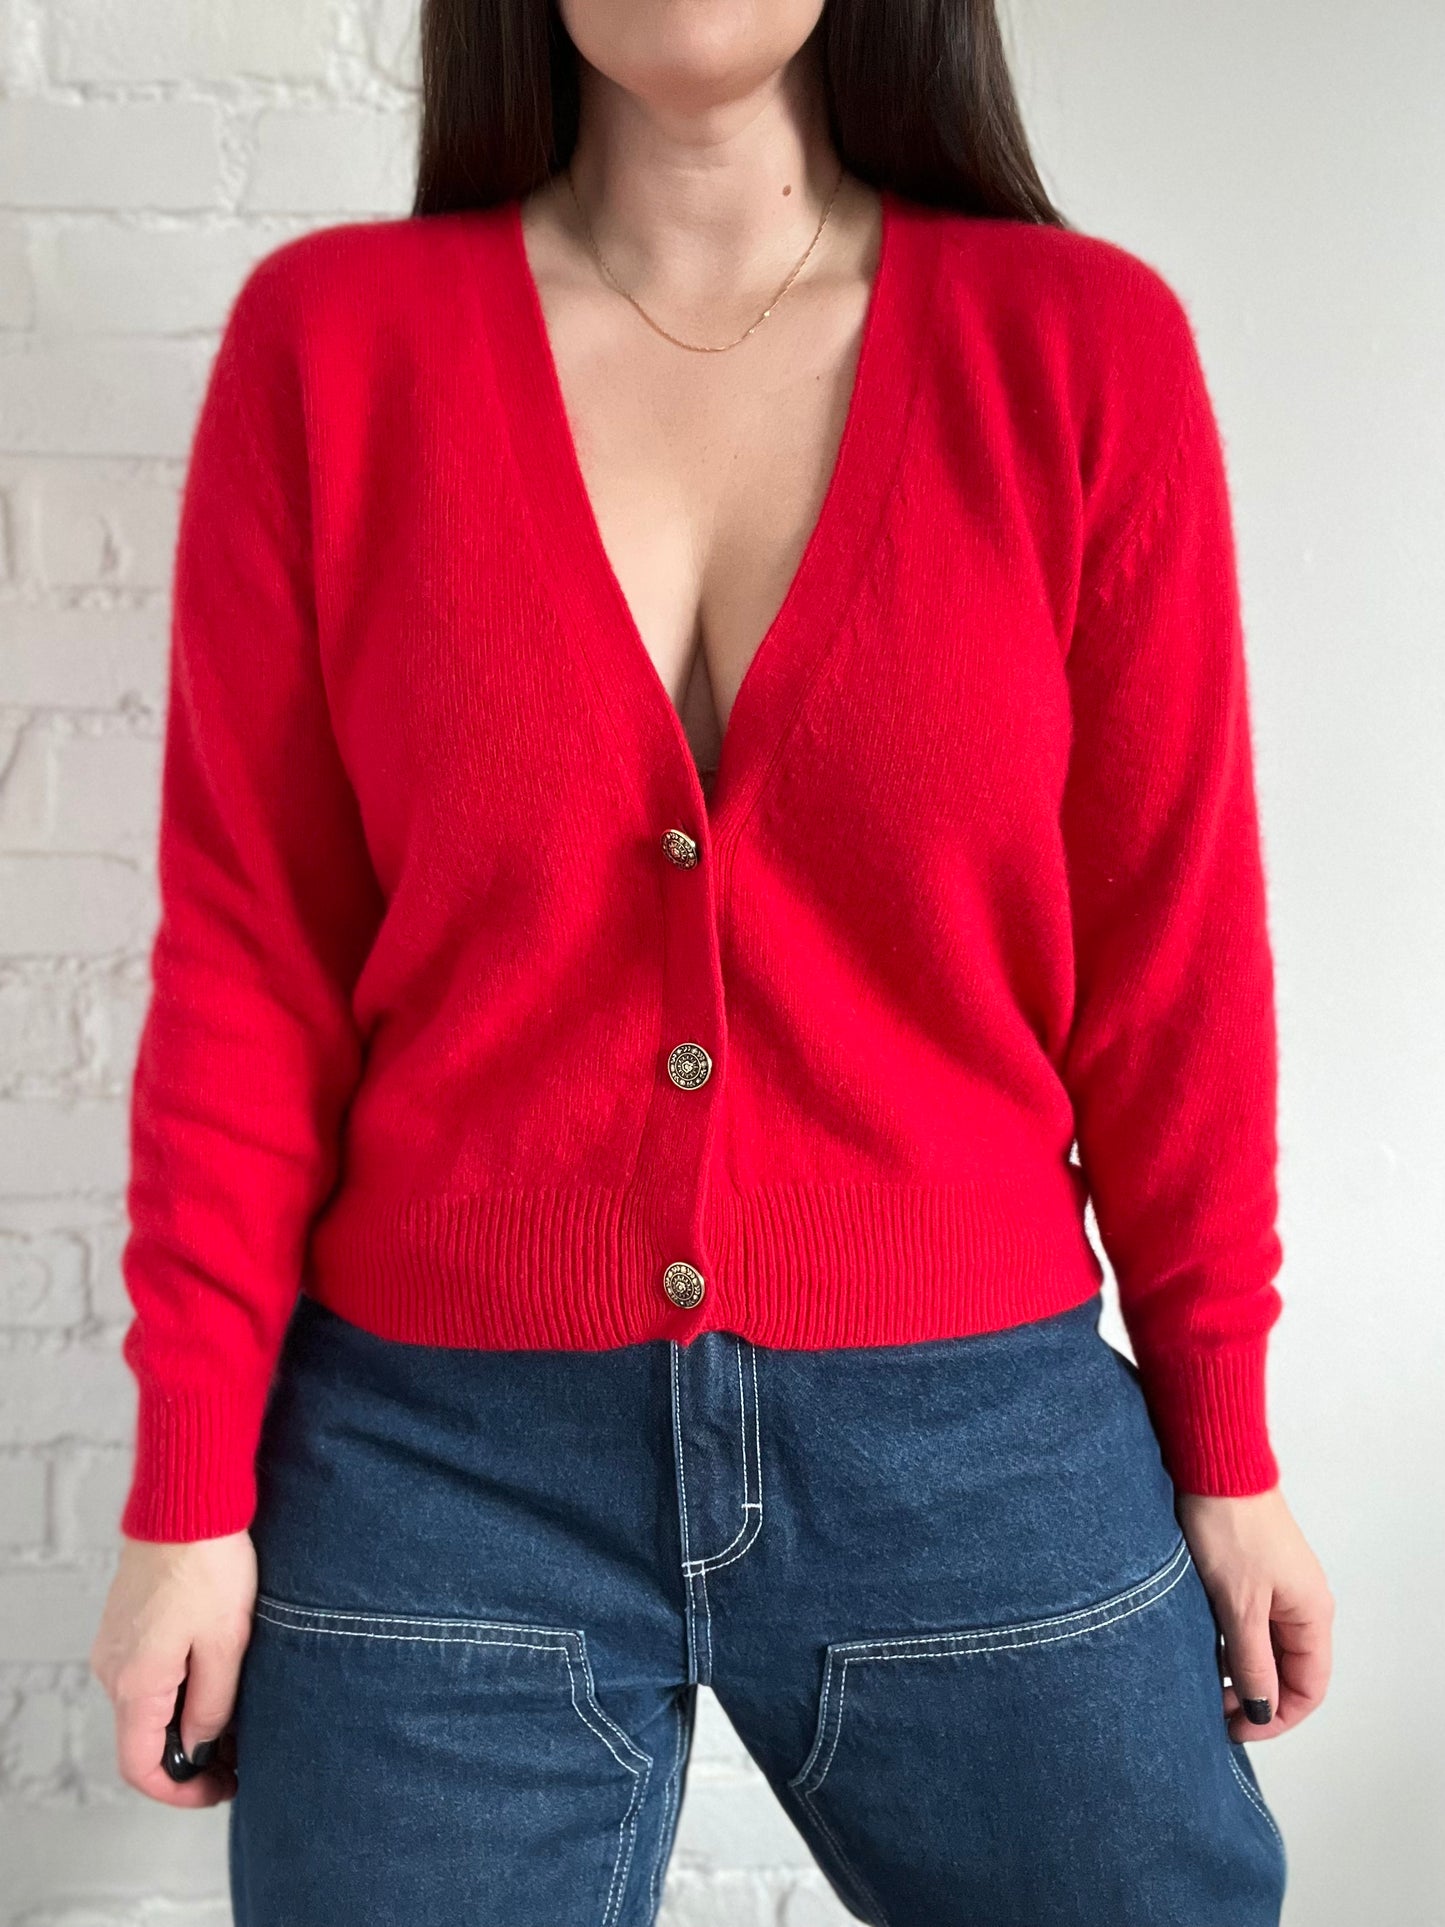 Cashmere Red & Gold Cardigan  - S